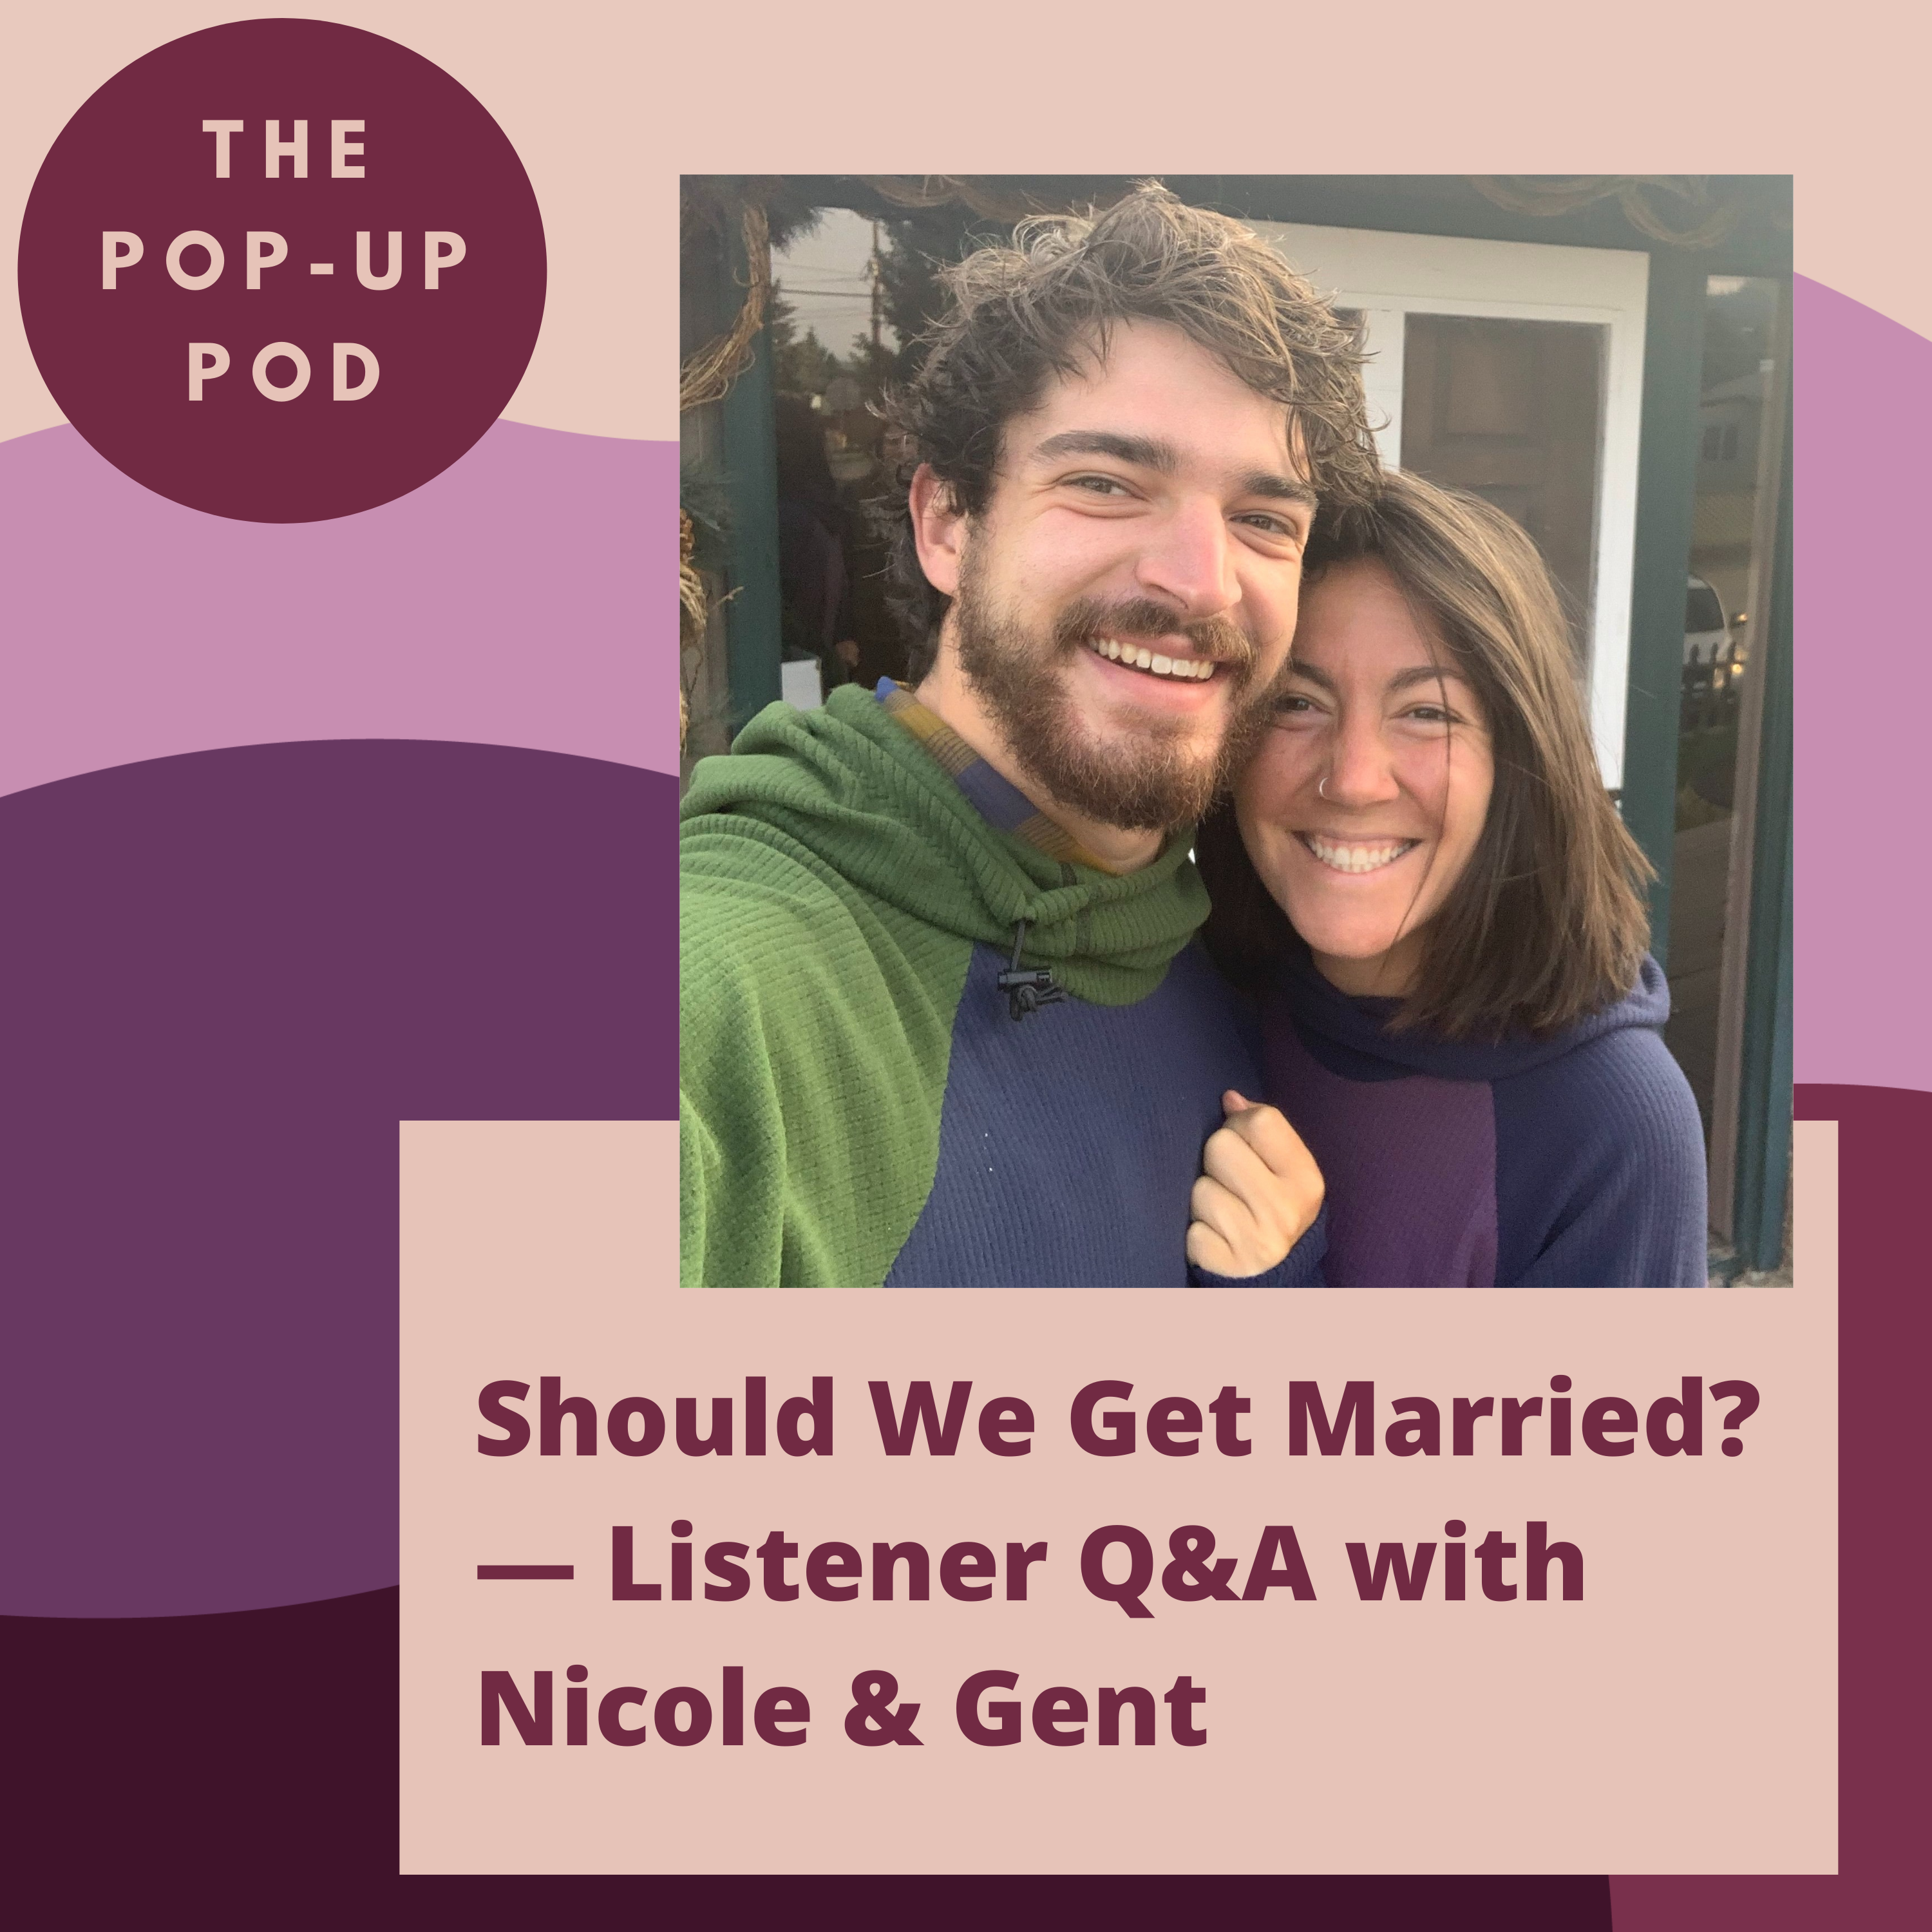 Should We Get Married? — Listener Q&A with Nicole & Gent